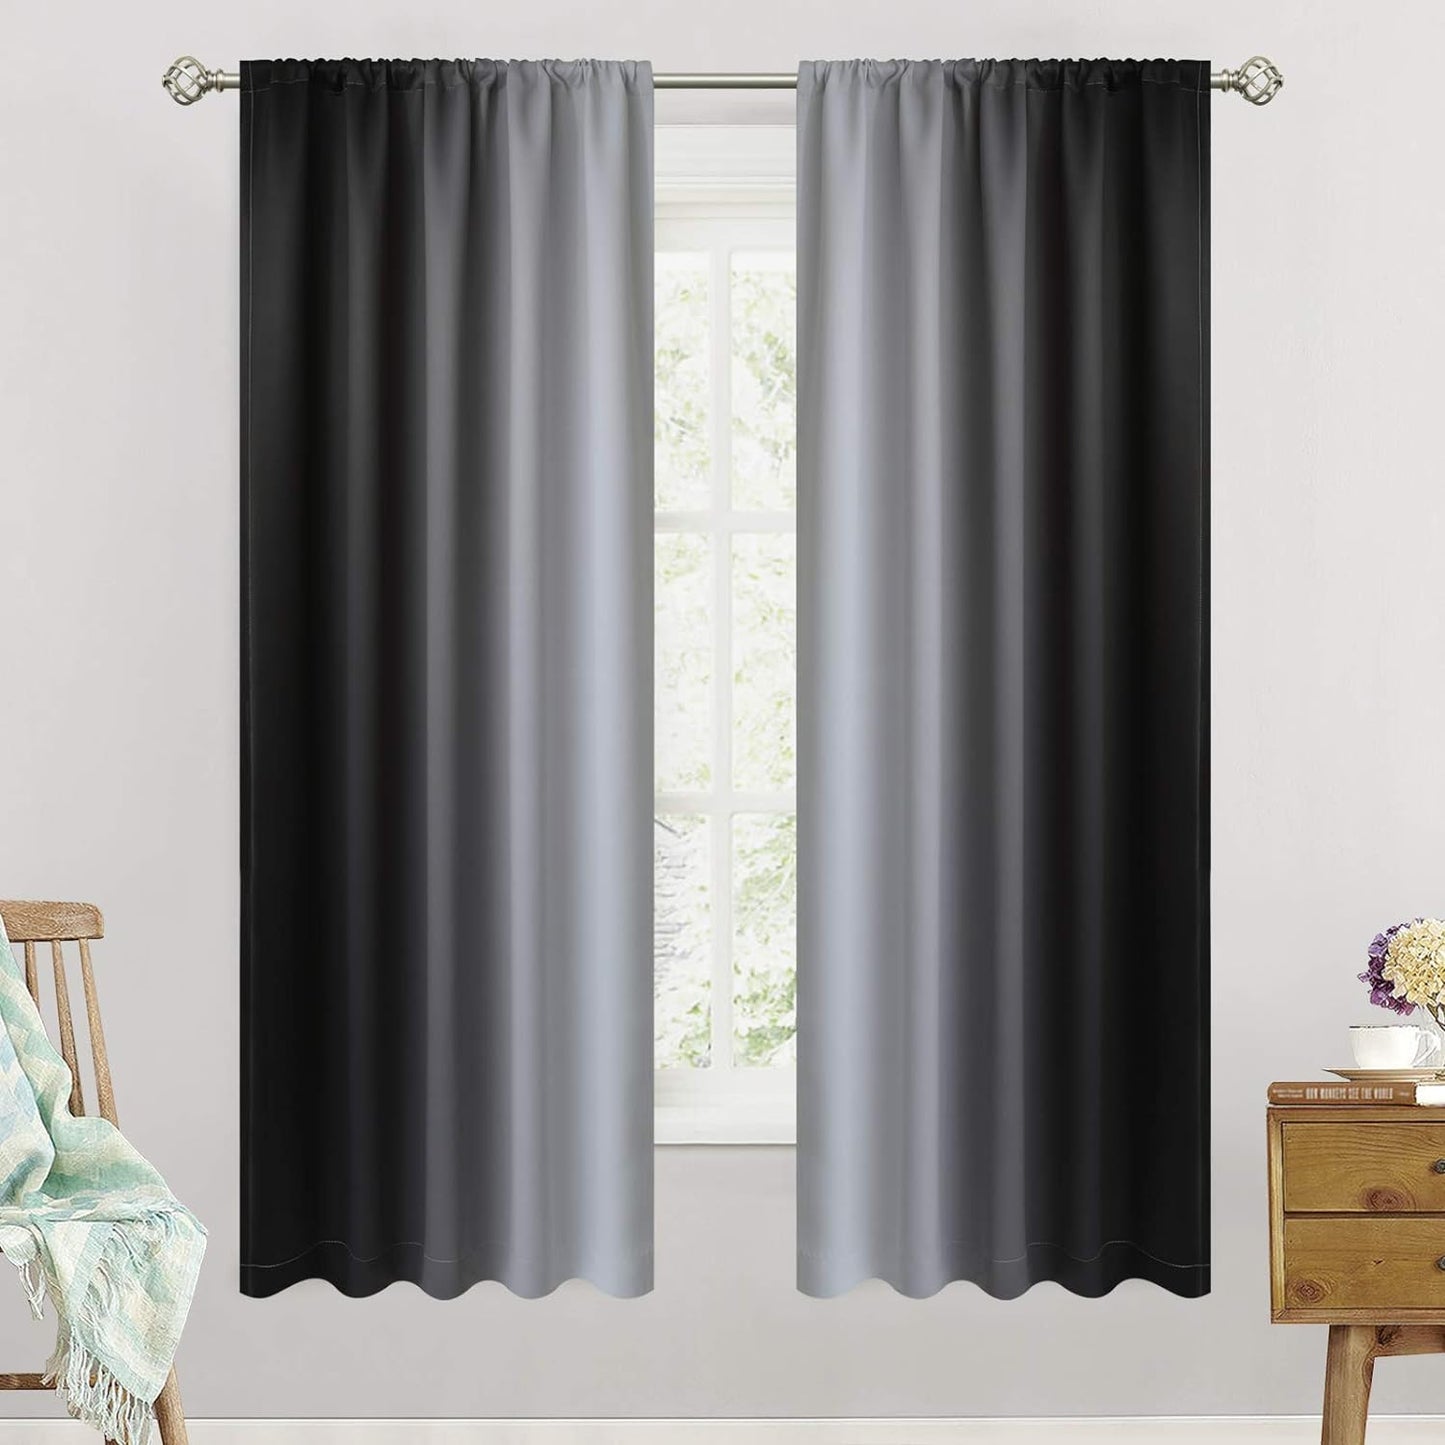 Simplehome Ombre Room Darkening Curtains for Bedroom, Light Blocking Gradient Purple to Greyish White Thermal Insulated Rod Pocket Window Curtains Drapes for Living Room,2 Panels, 52X84 Inches Length  SimpleHome Black 52W X 63L / 2 Panels 